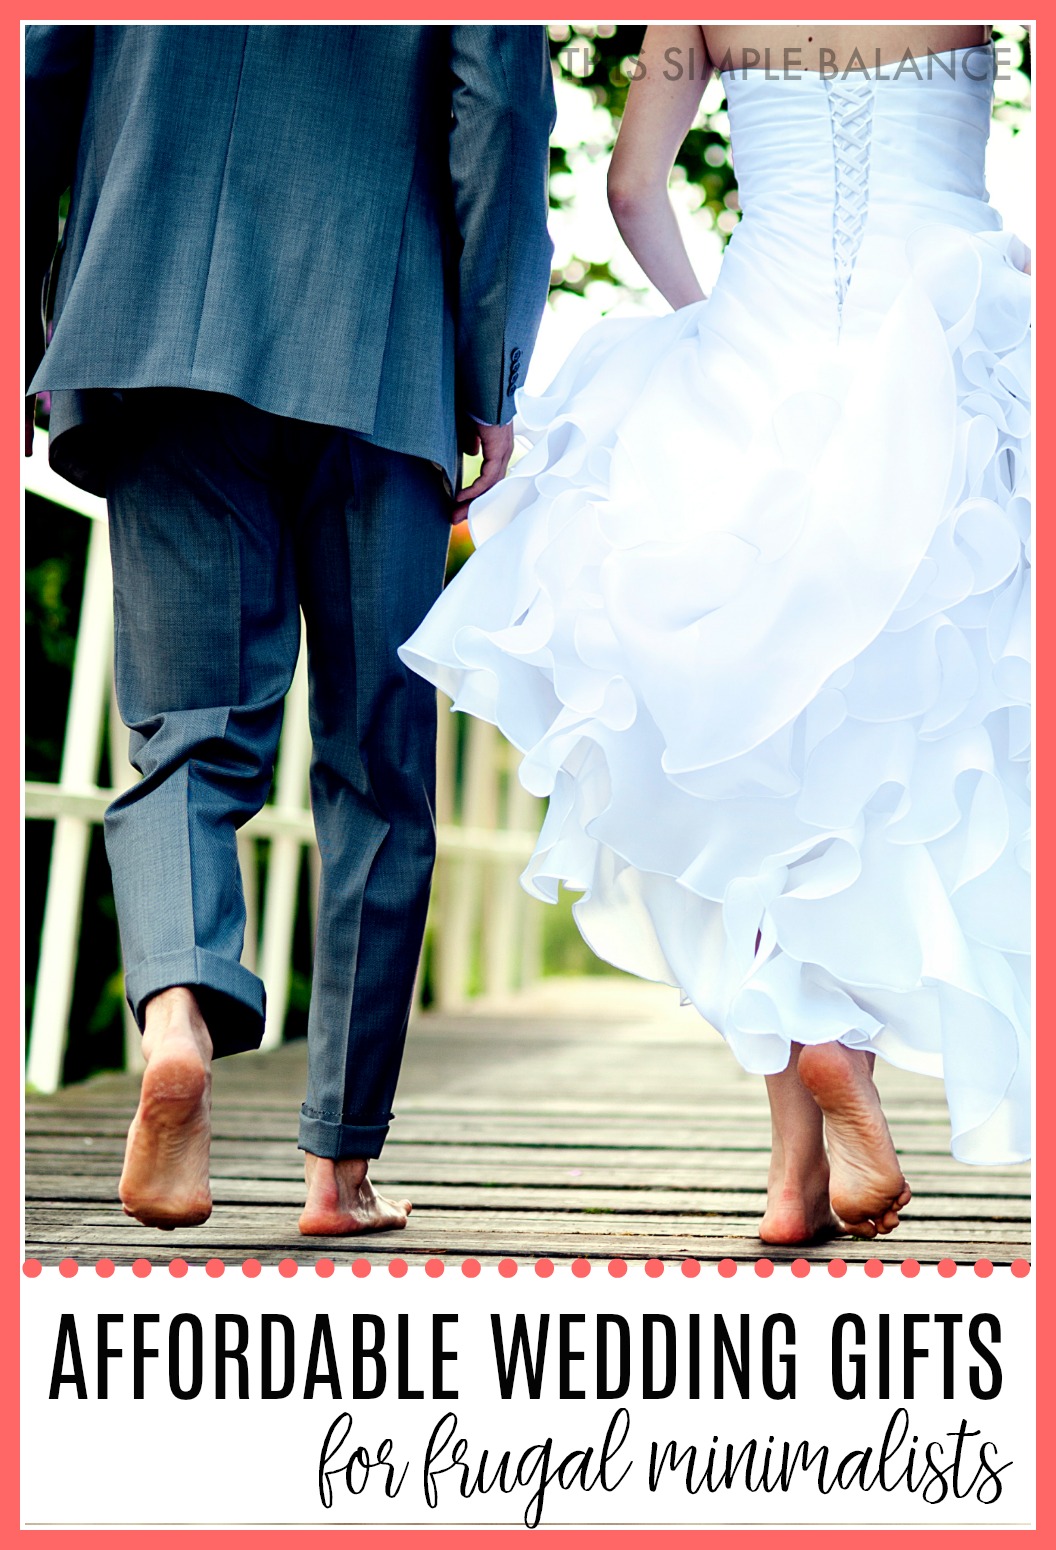 bride and groom from the back walking on wooden bridge, with text overlay "affordable wedding gifts for minimalists"